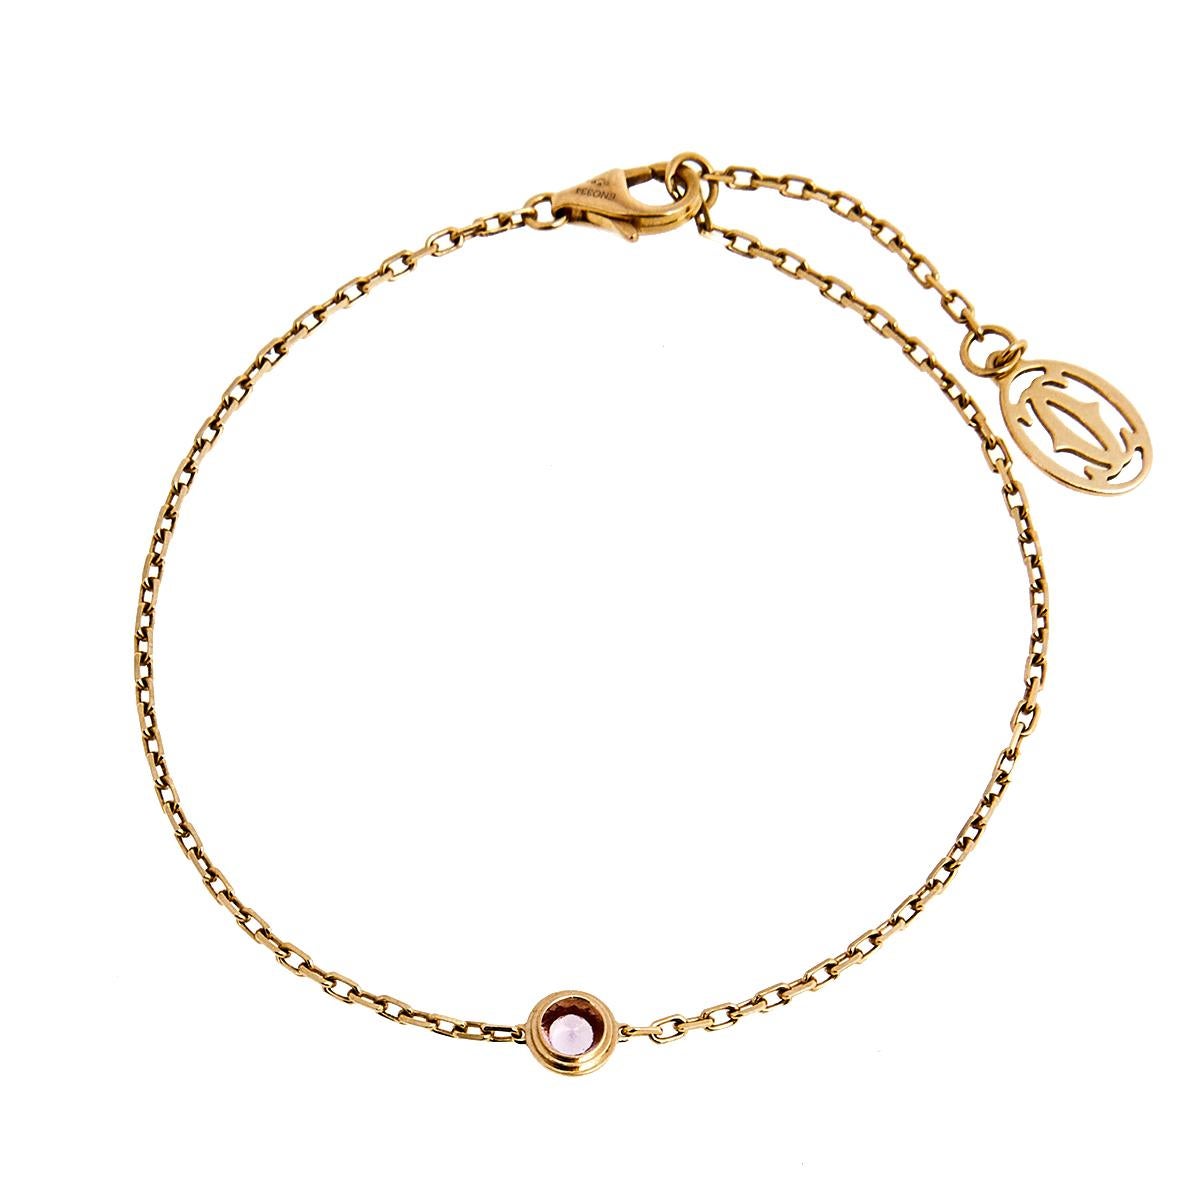 The Saphirs Légers de Cartier bracelet adds a feminine touch, accented with a shimmering pink sapphire. Made from 18k rose gold, its dainty chain is equipped with a lobster clasp closure and a Cartier CC charm, giving it a classy aesthetic.